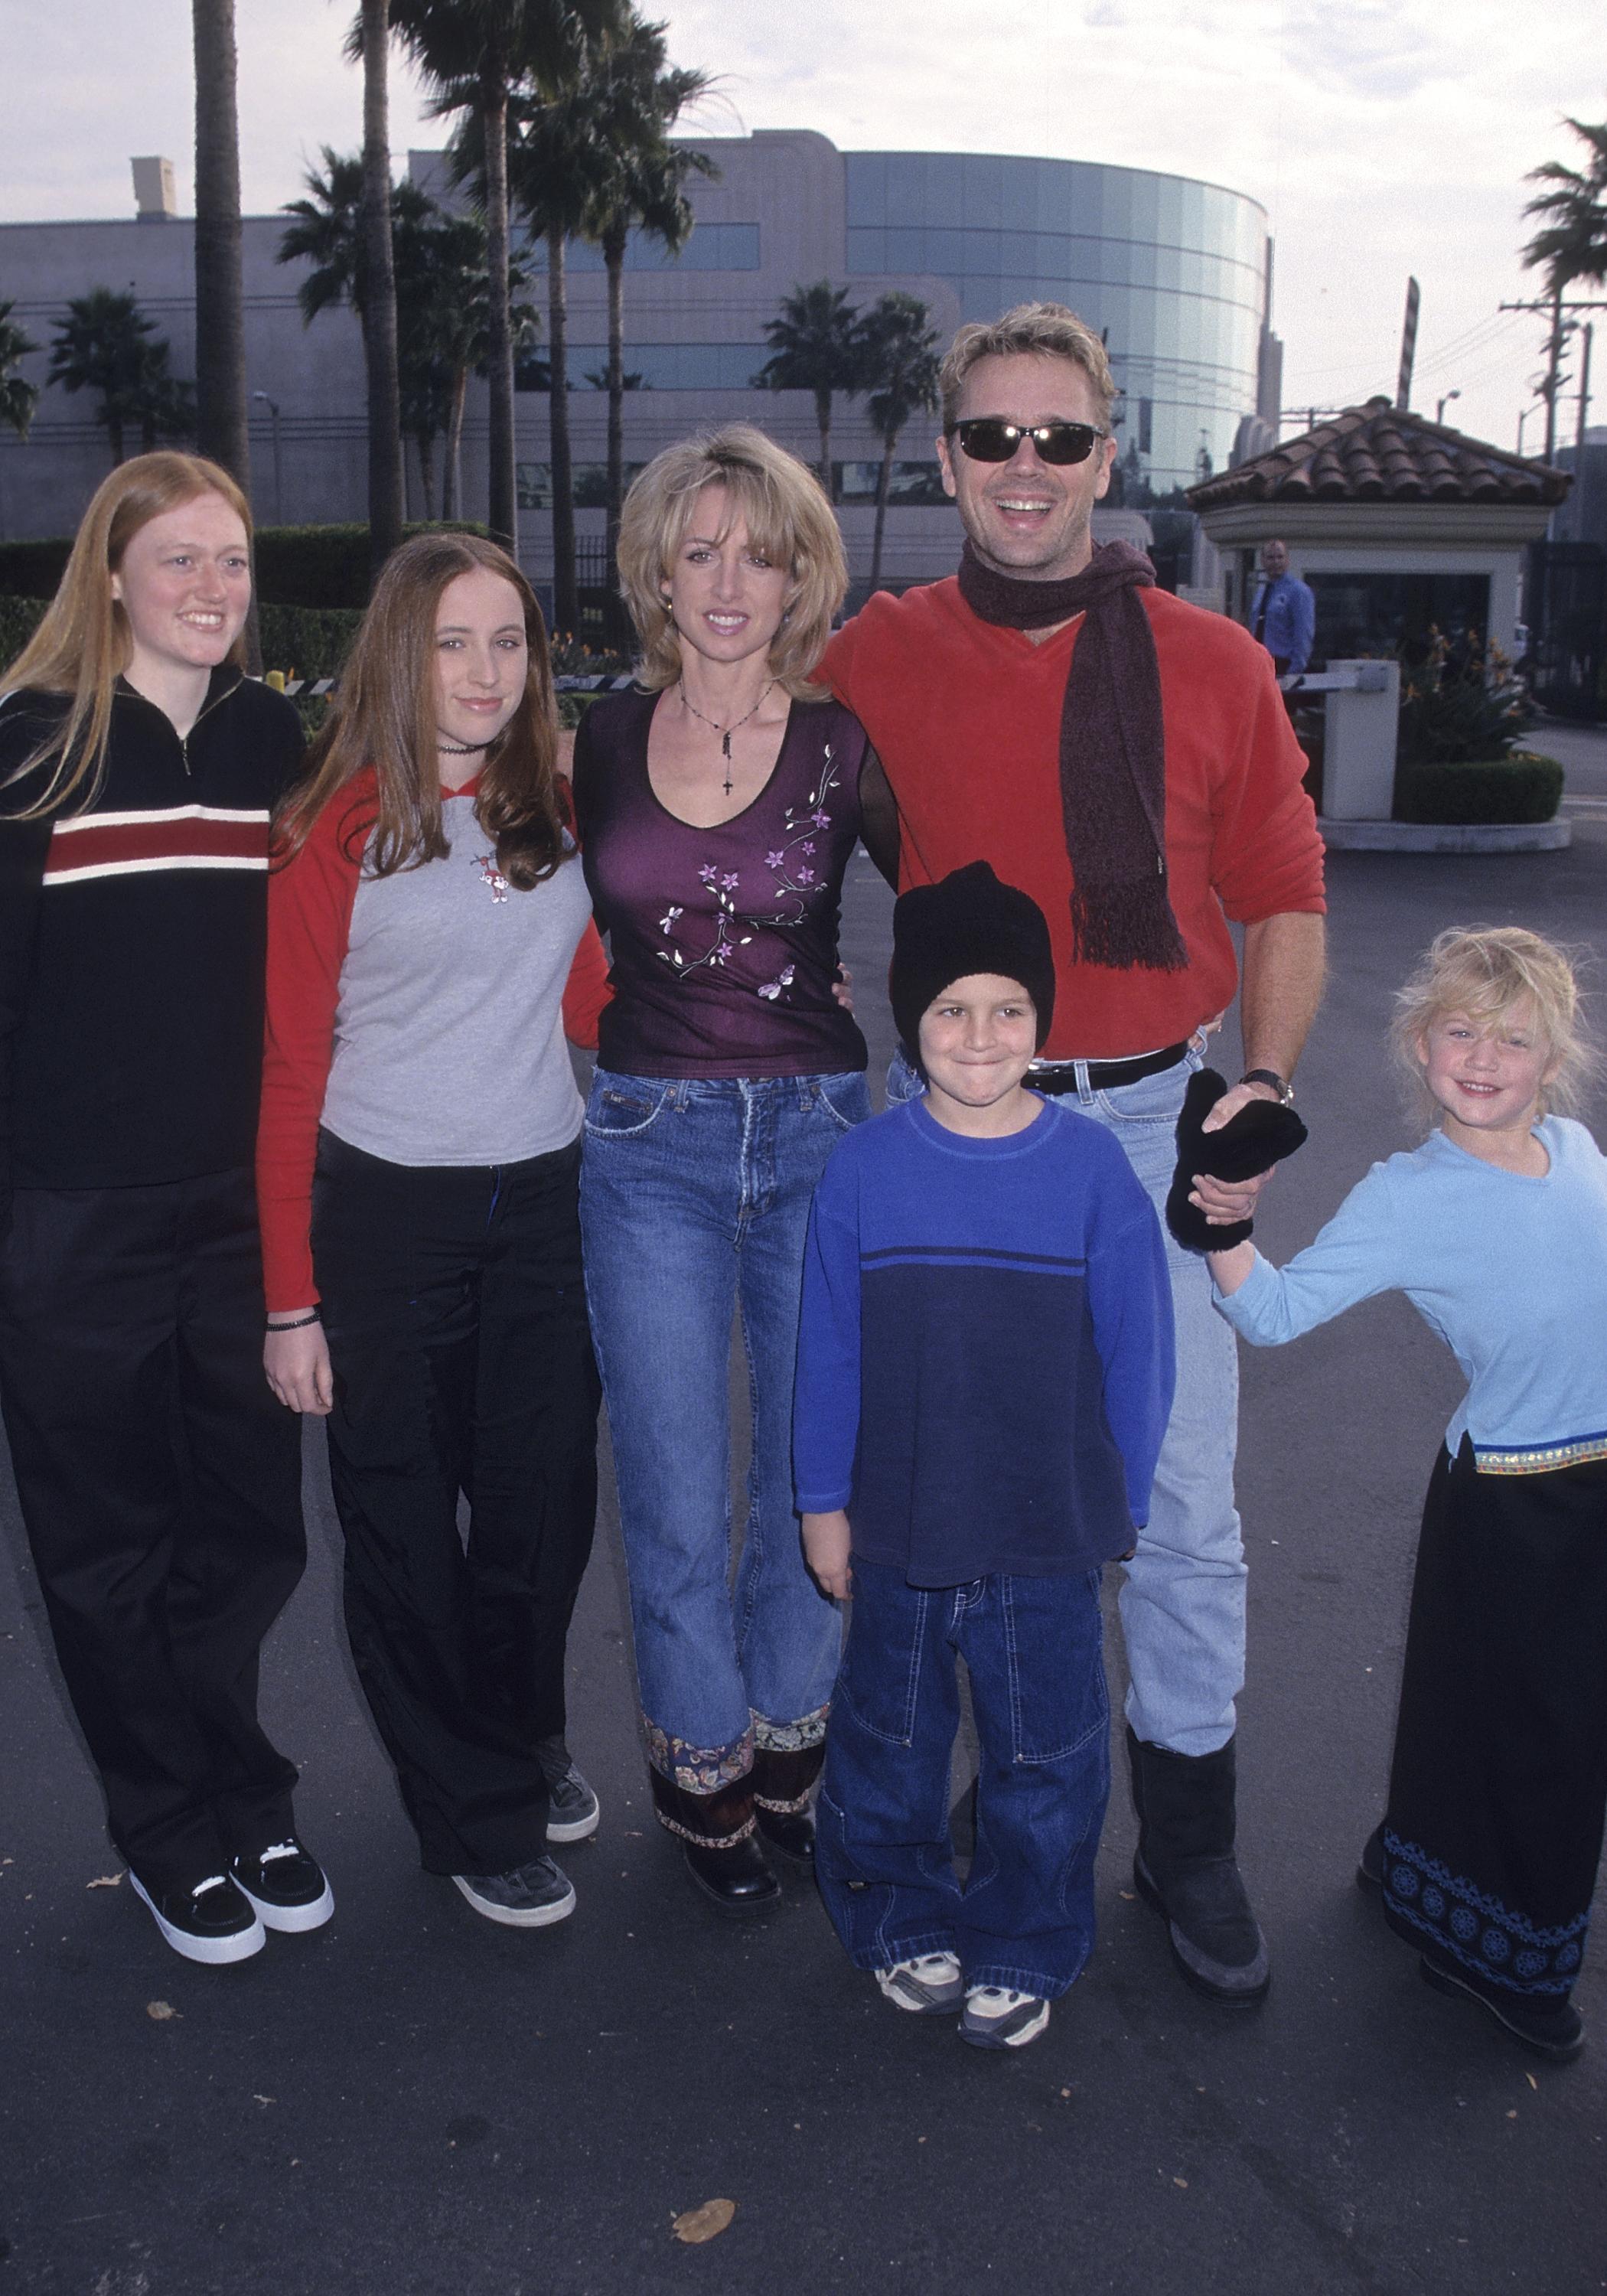 John Schneider, Elly Castle, Leah Castle, Chasen Schneider and Karis Schneider on January 29, 2000 in Hollywood, California | Source: Getty Images